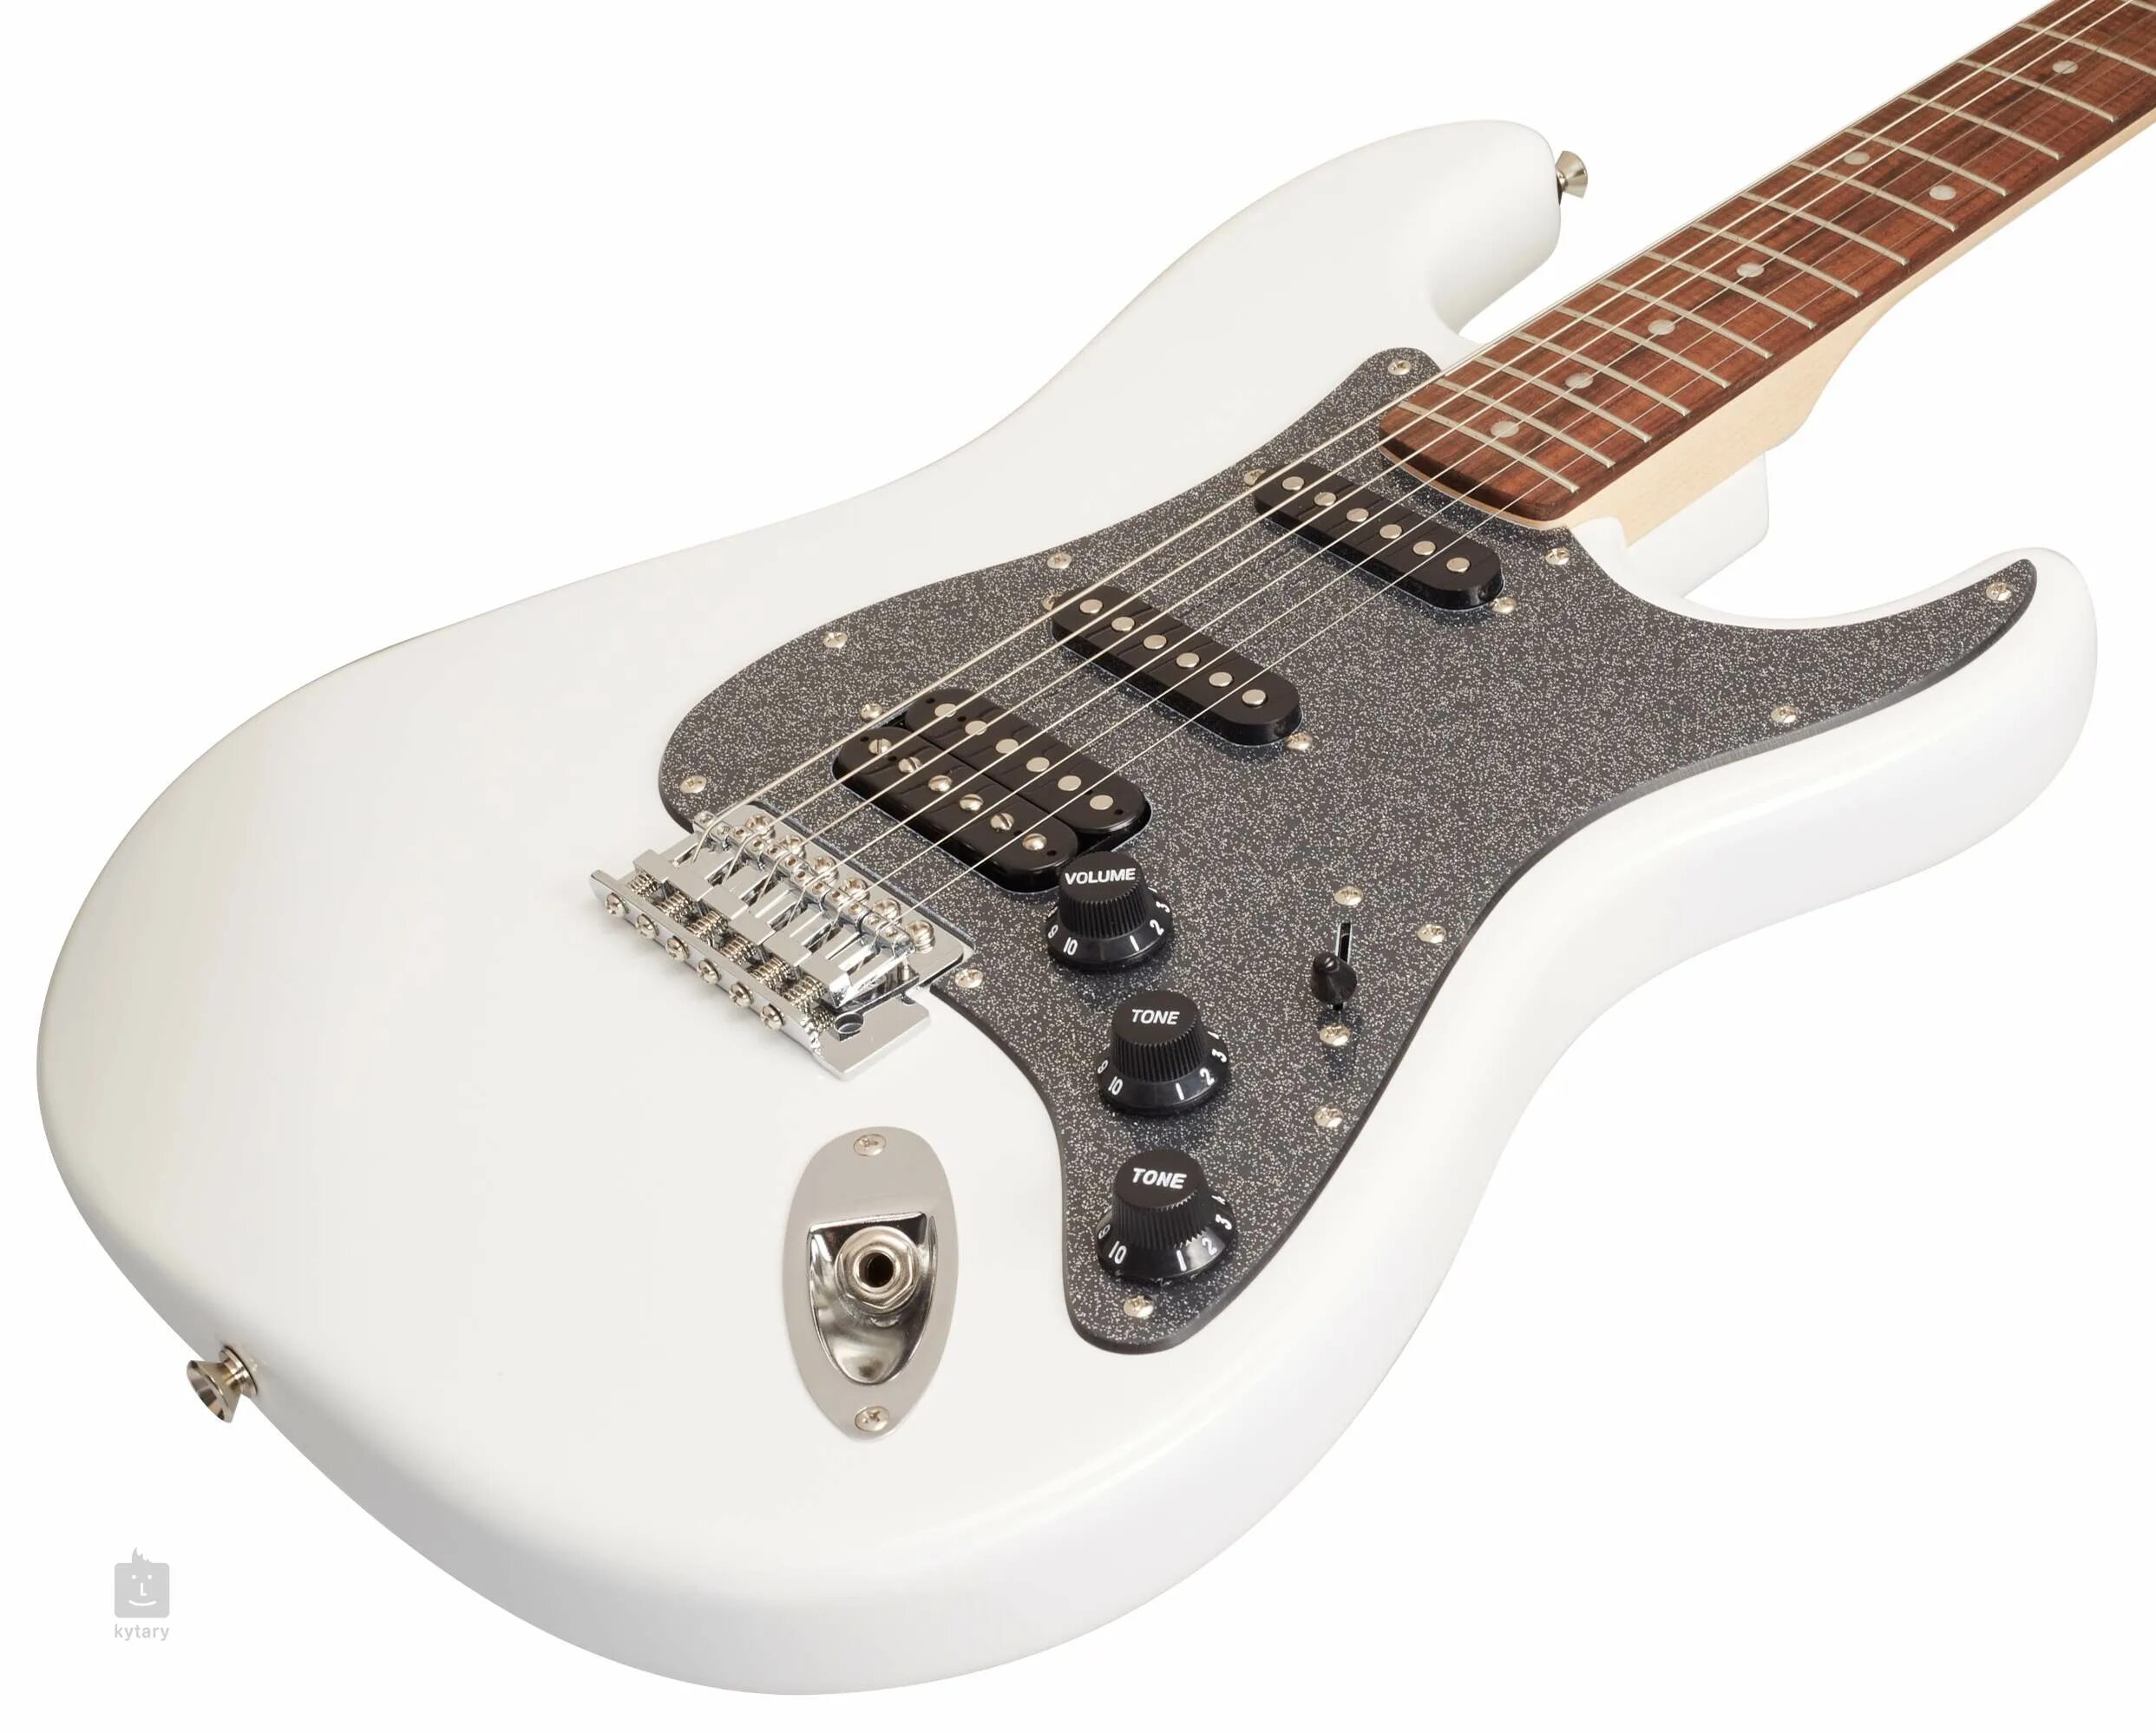 Squier affinity stratocaster. Squier Affinity HSS. Stratocaster Affinity HSS. Stratocaster Affinity Olympic White. Электрогитара Squier Affinity fat Stratocaster.